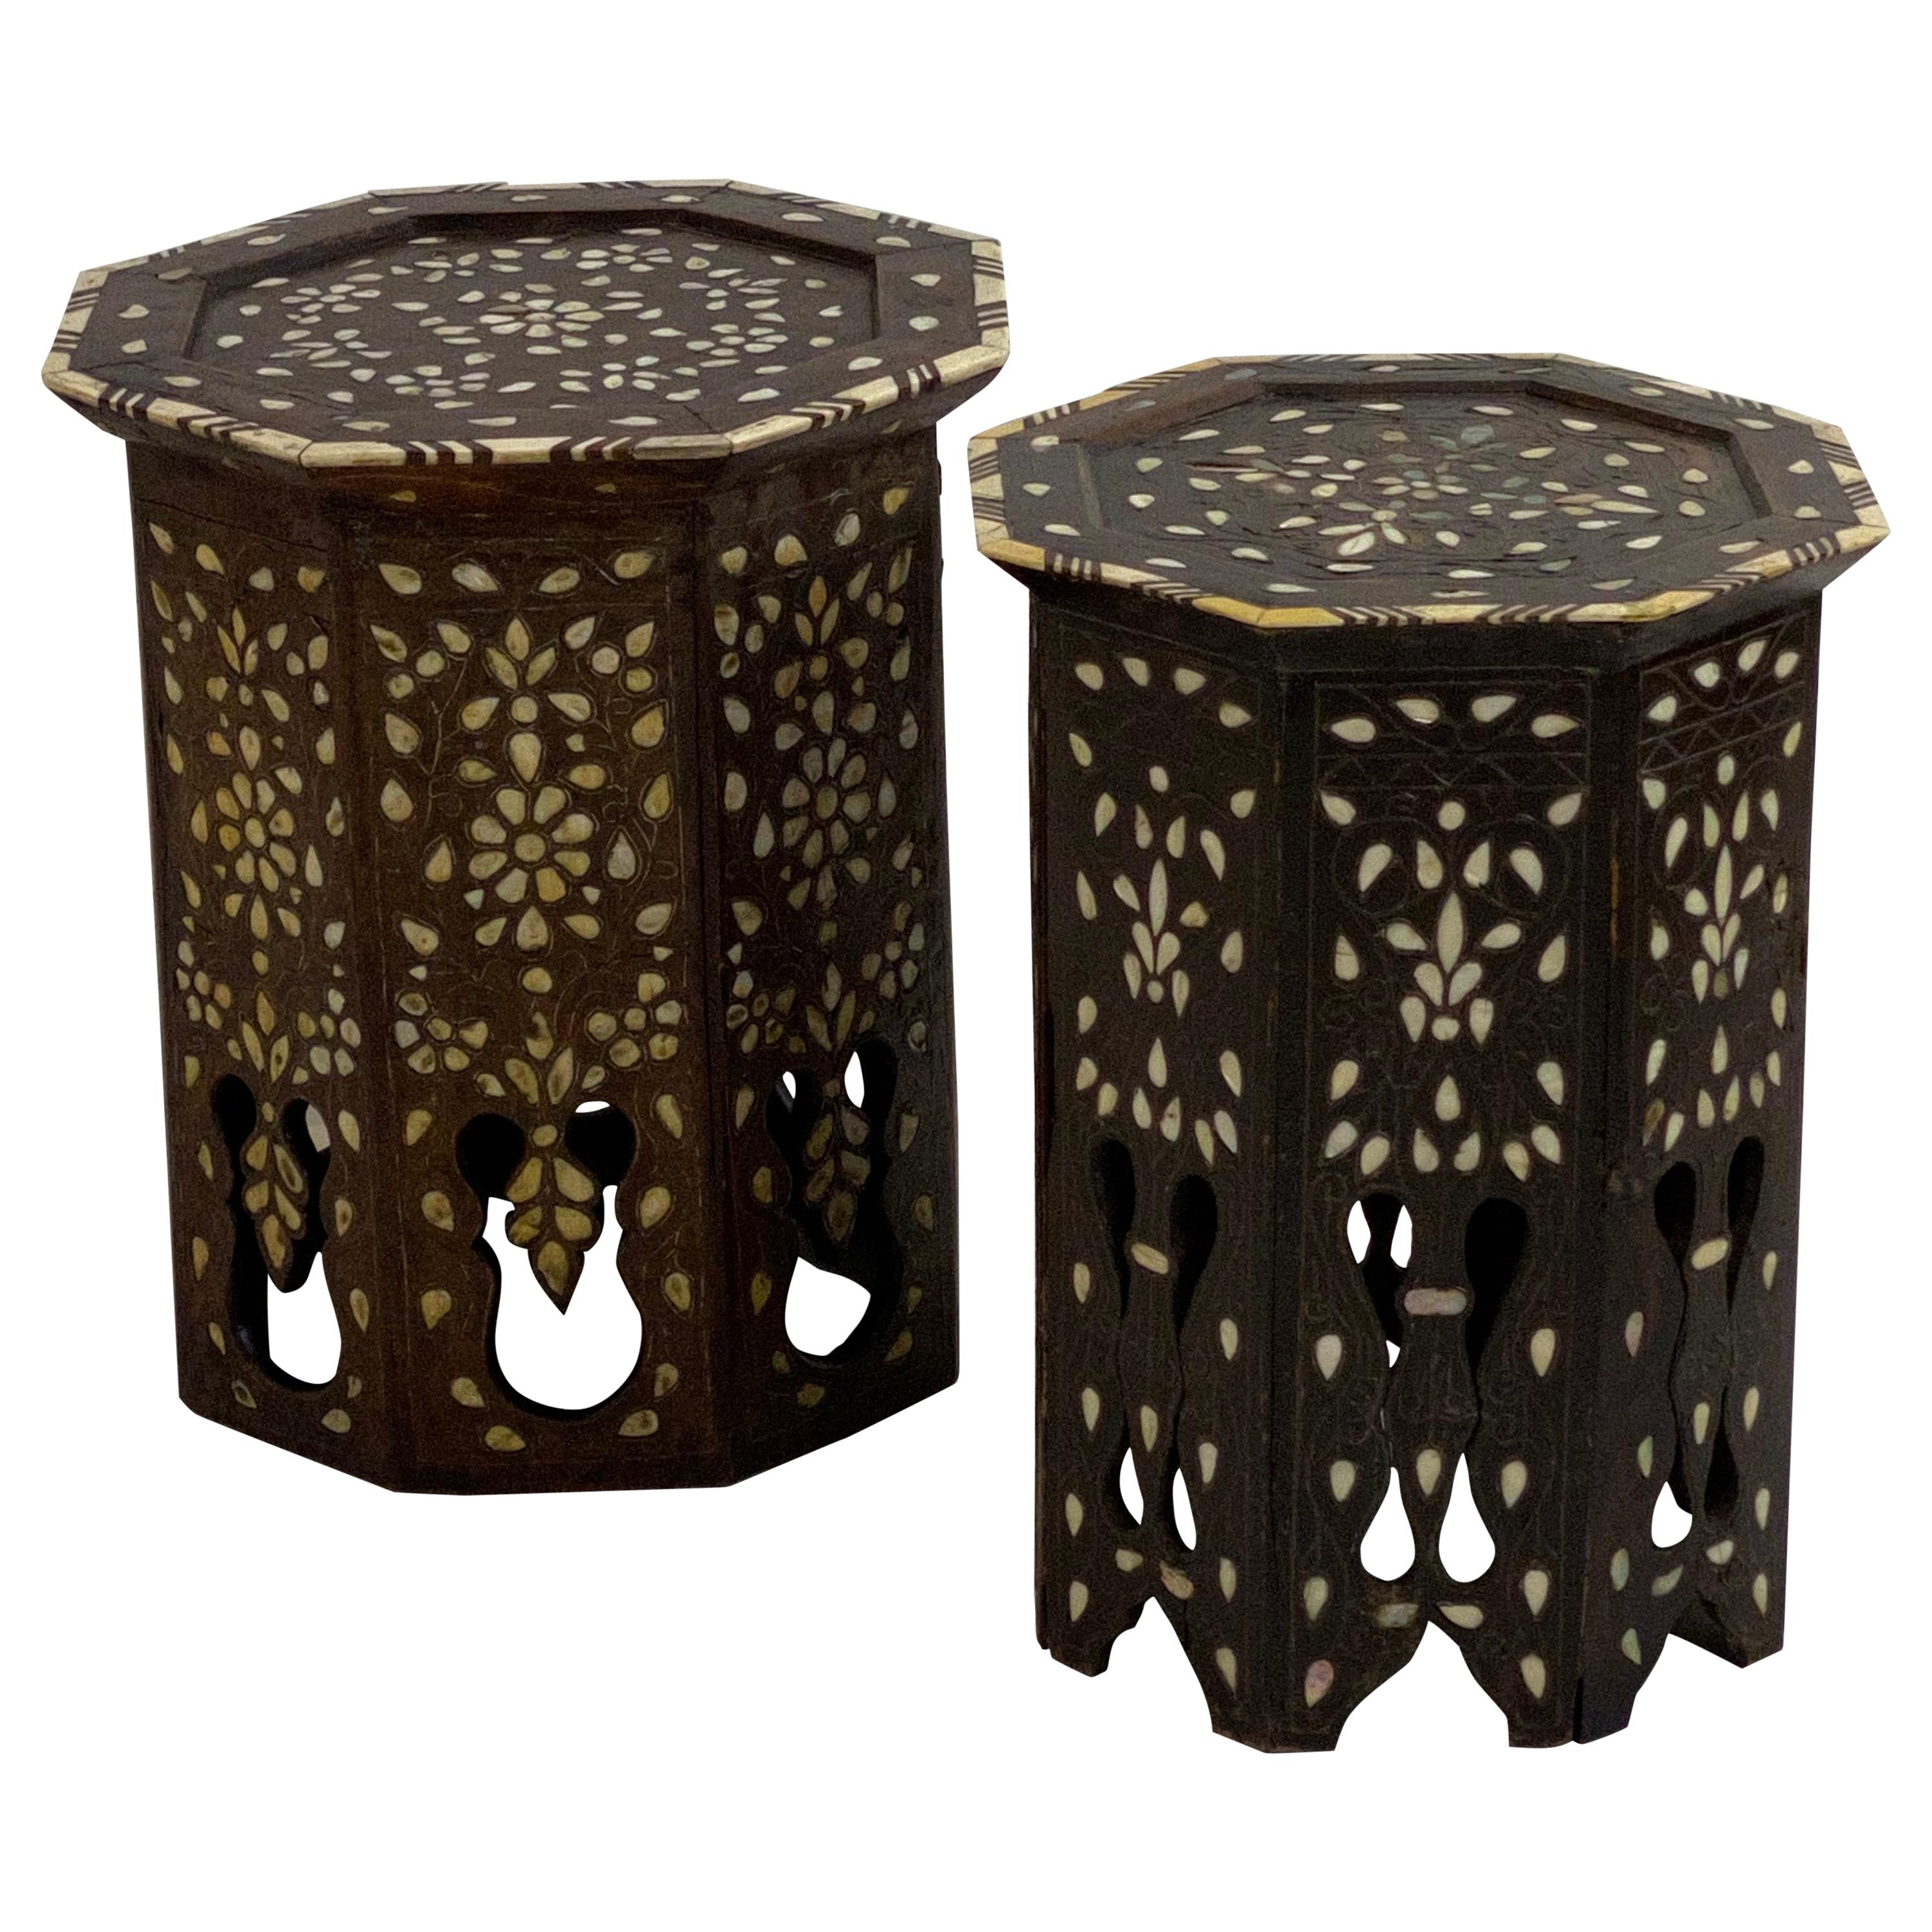 Two Moroccan Sidetables with Nice Inlay